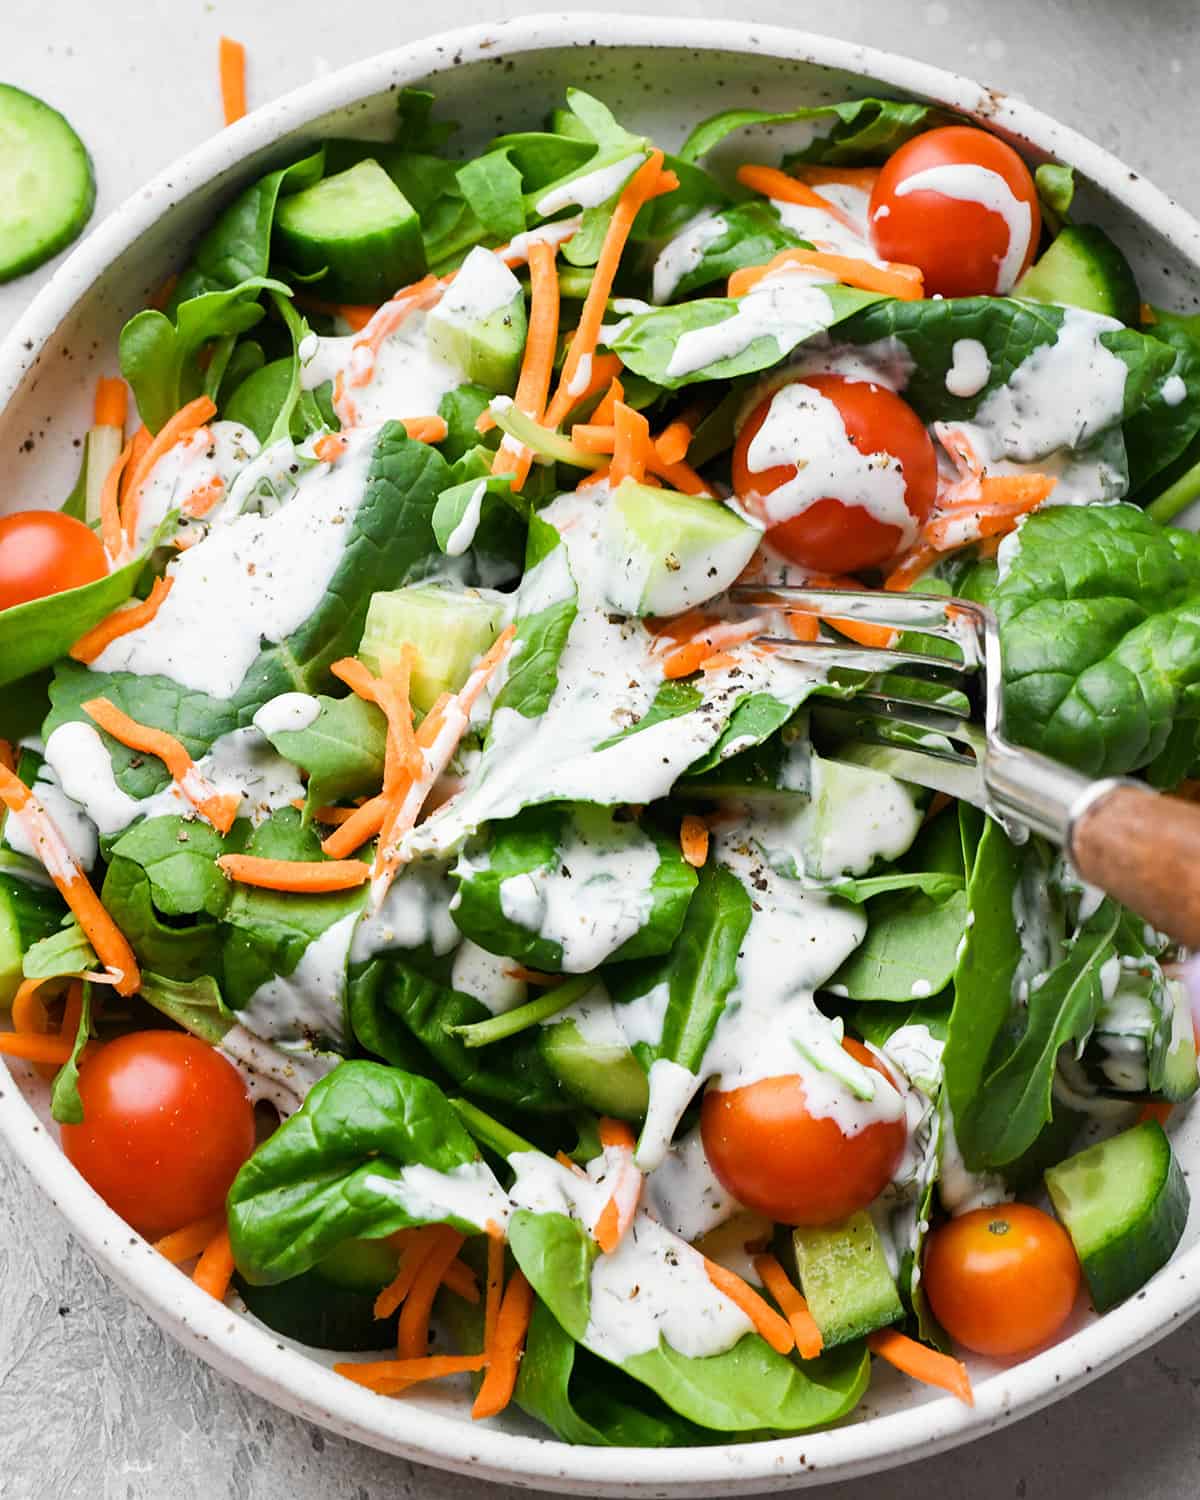 Ranch Dressing Mix as dressing on a green salad